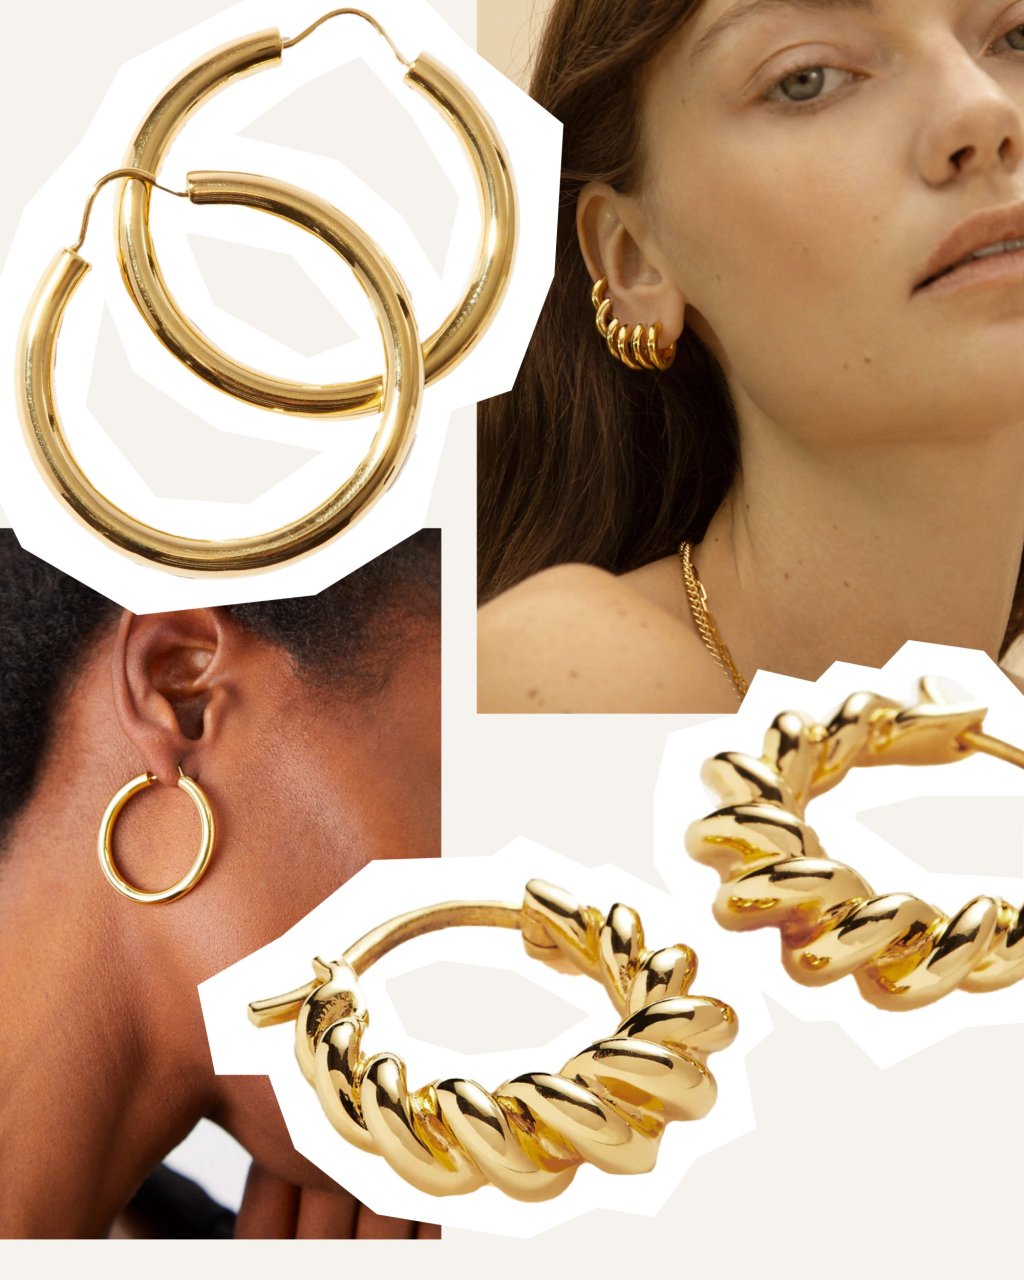 The Best Gold Hoop Earrings And How To Shop For Them